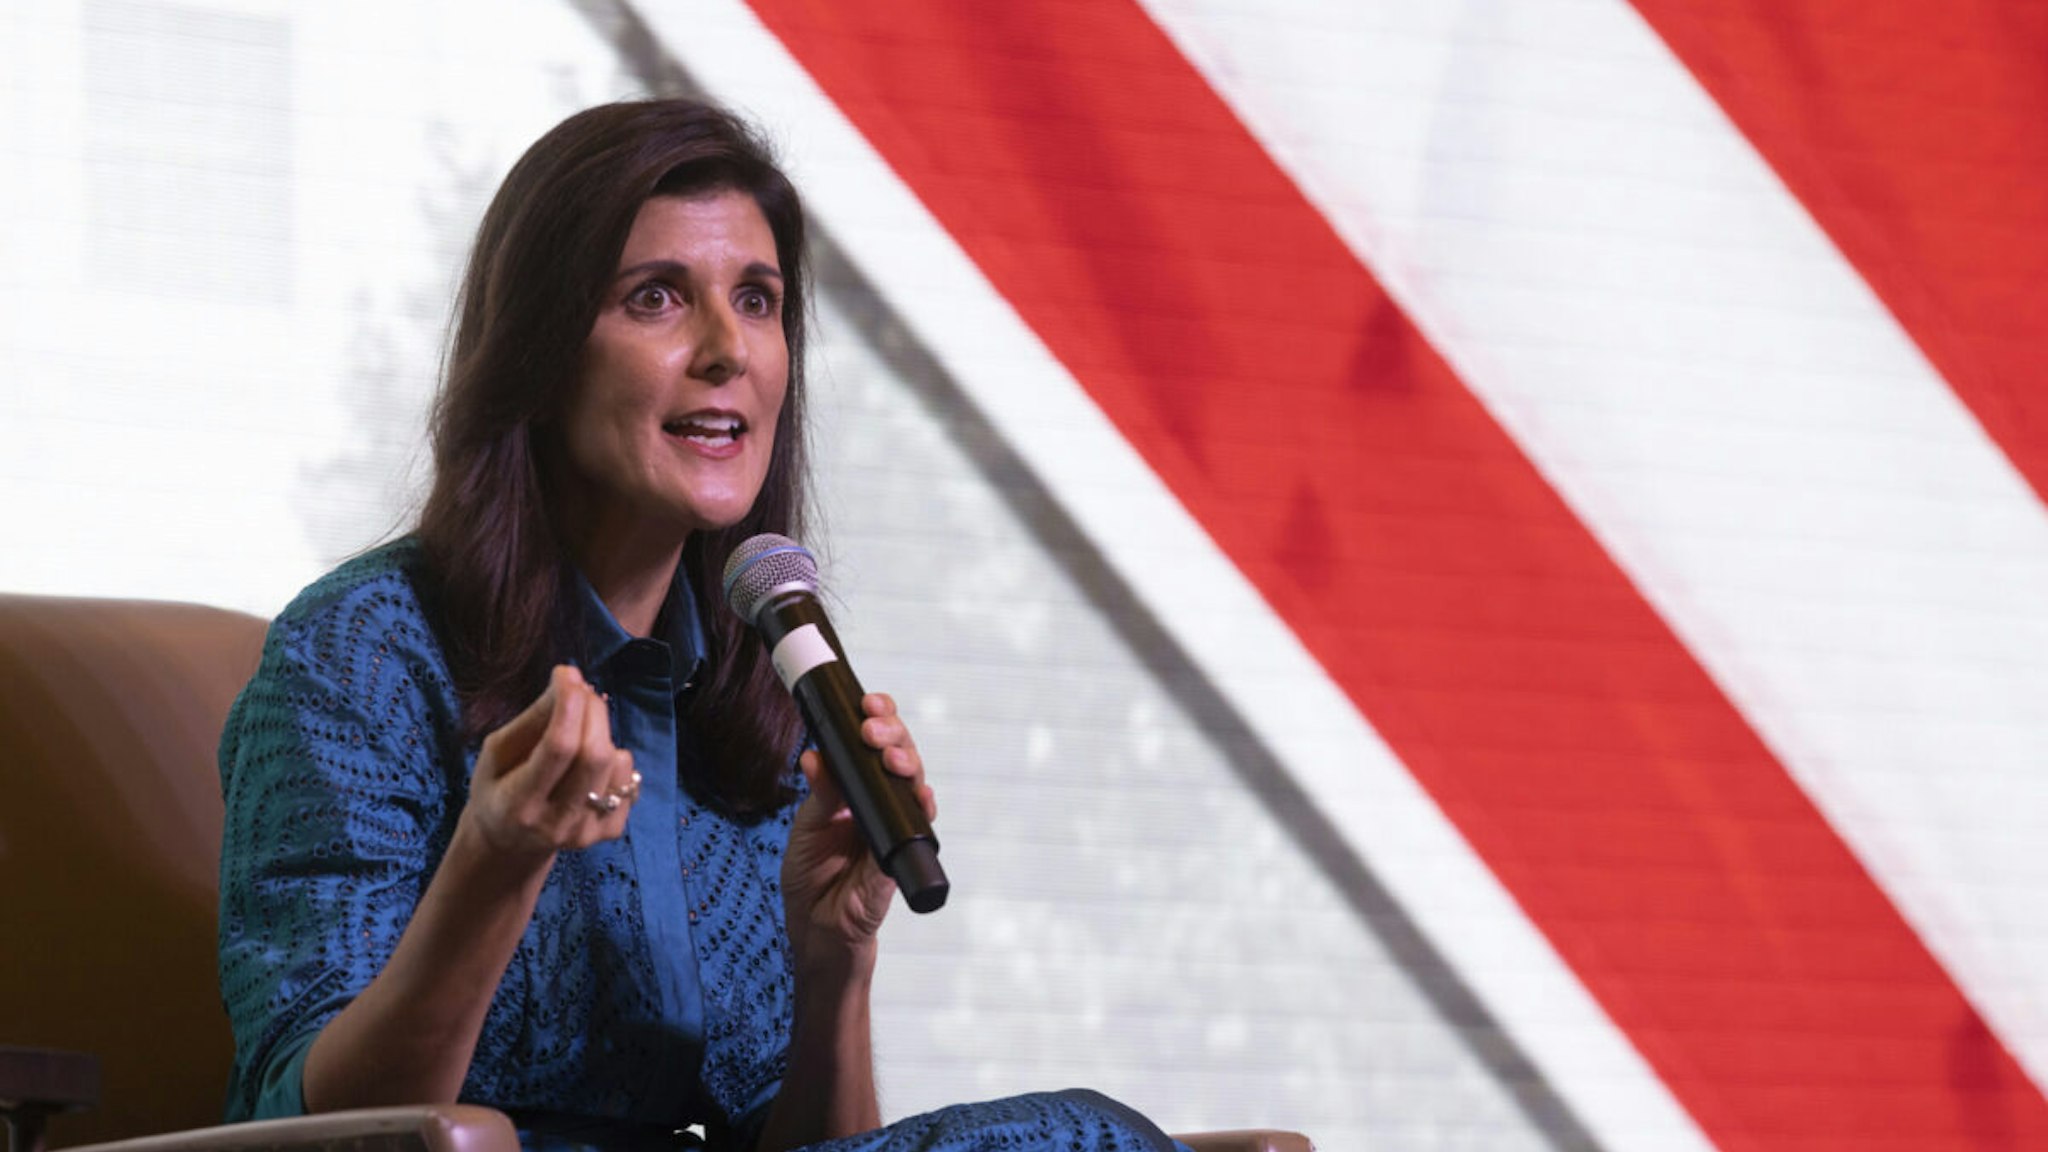 Nikki Haley, former ambassador to the United Nations, speaks during the Palmetto Family Council's Vision 24 national conservative policy forum in North Charleston, South Carolina, US, on Saturday, March 18, 2023.